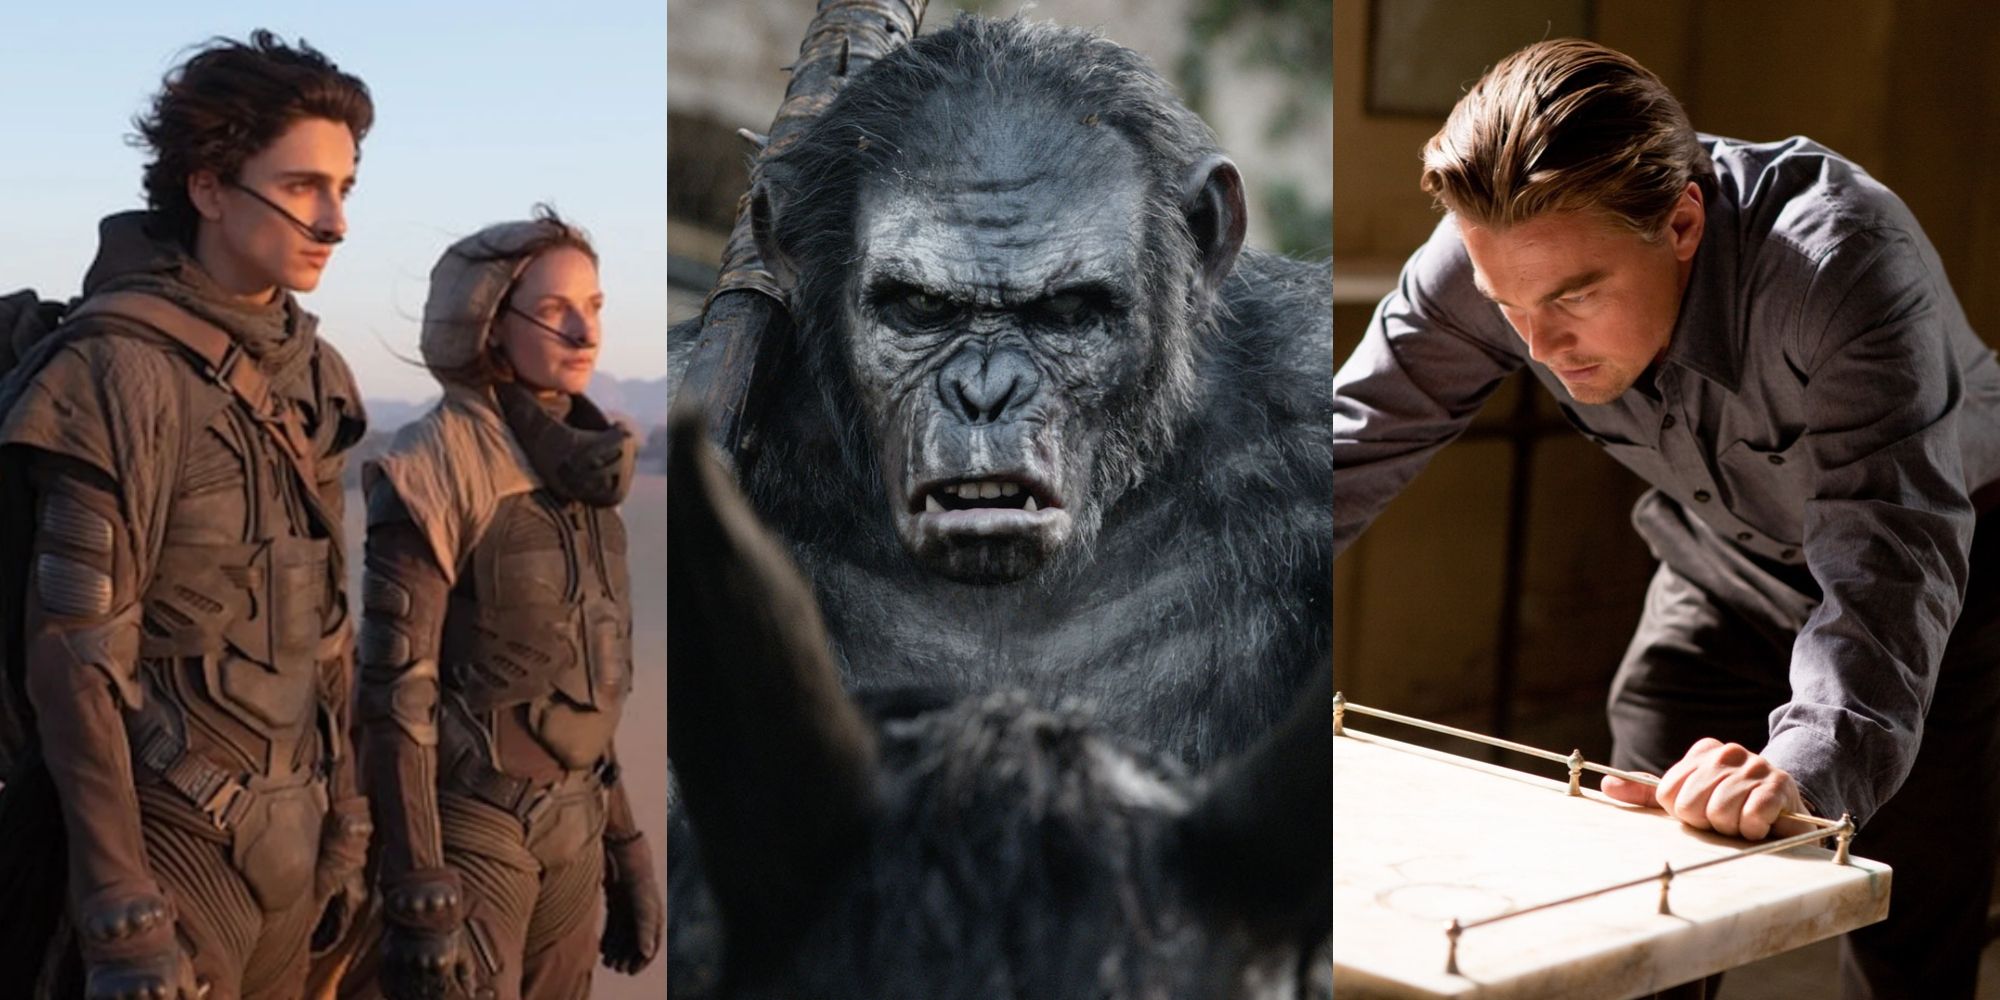 Split image showing characters from Dune, Dawn of the Planet of the Apes, and Inception